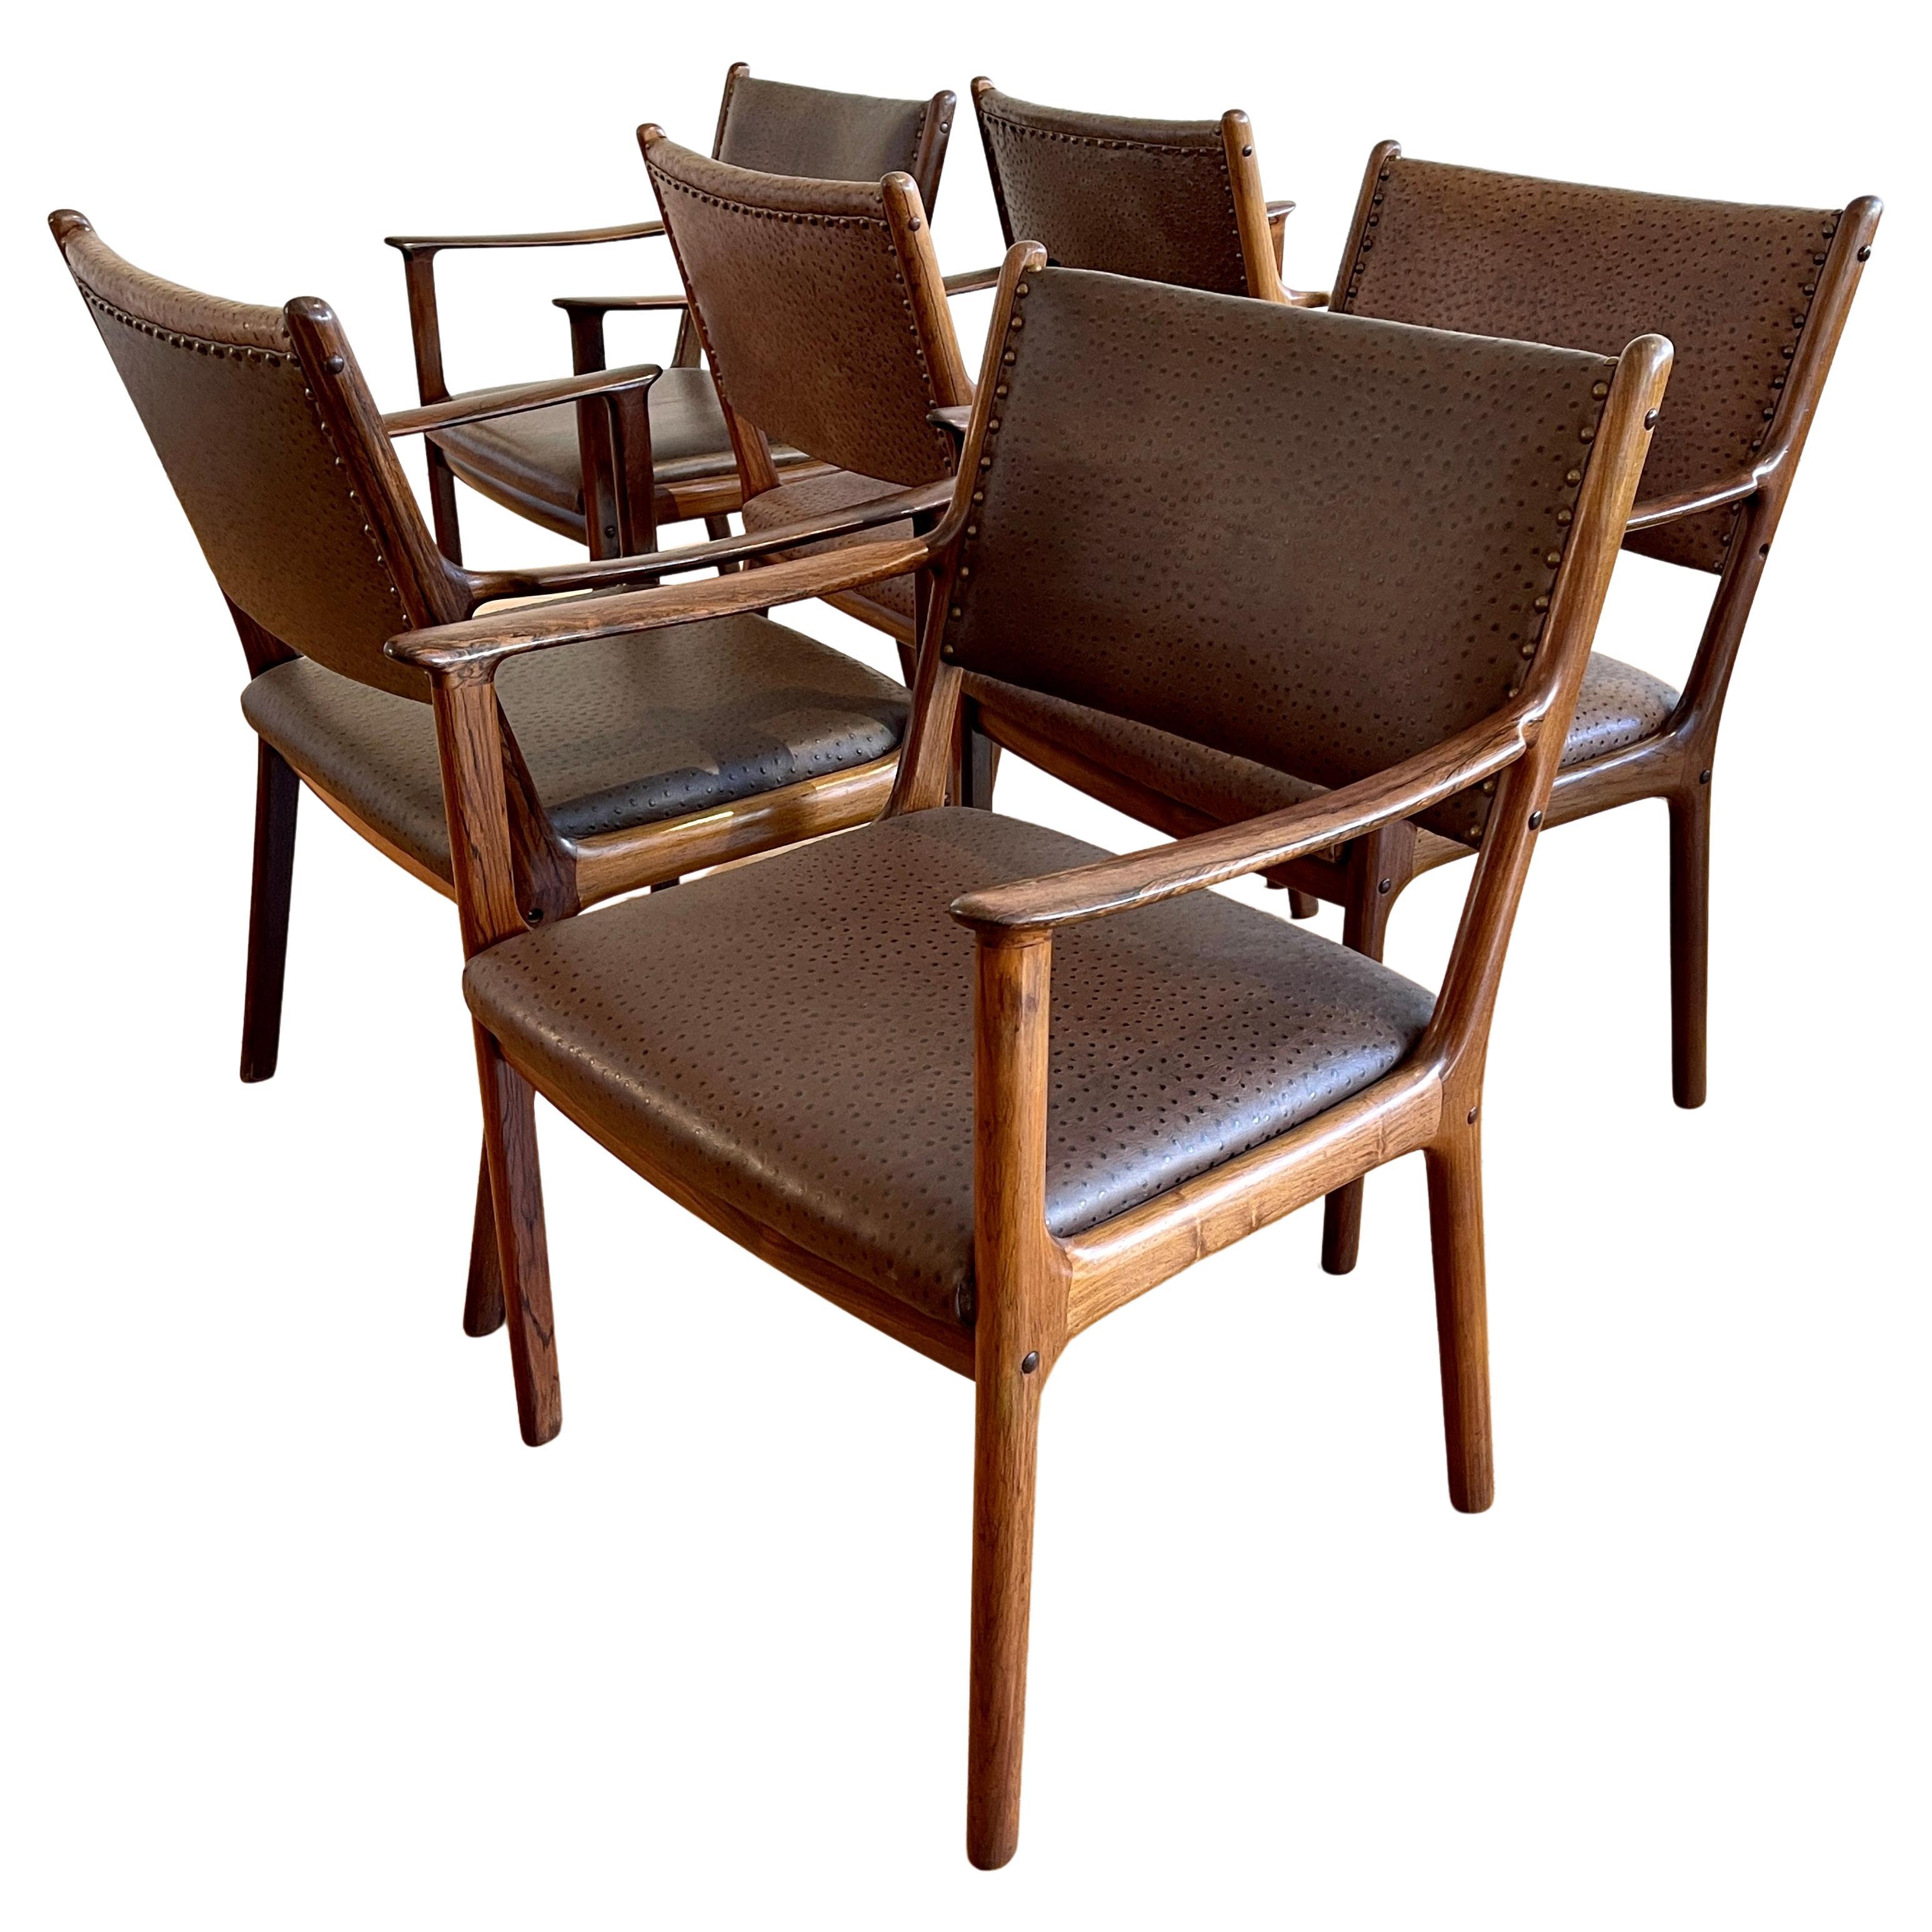 Ole Wanscher Rosewood & Leather Arm Dining Chairs Danish Modern Priced per Chair